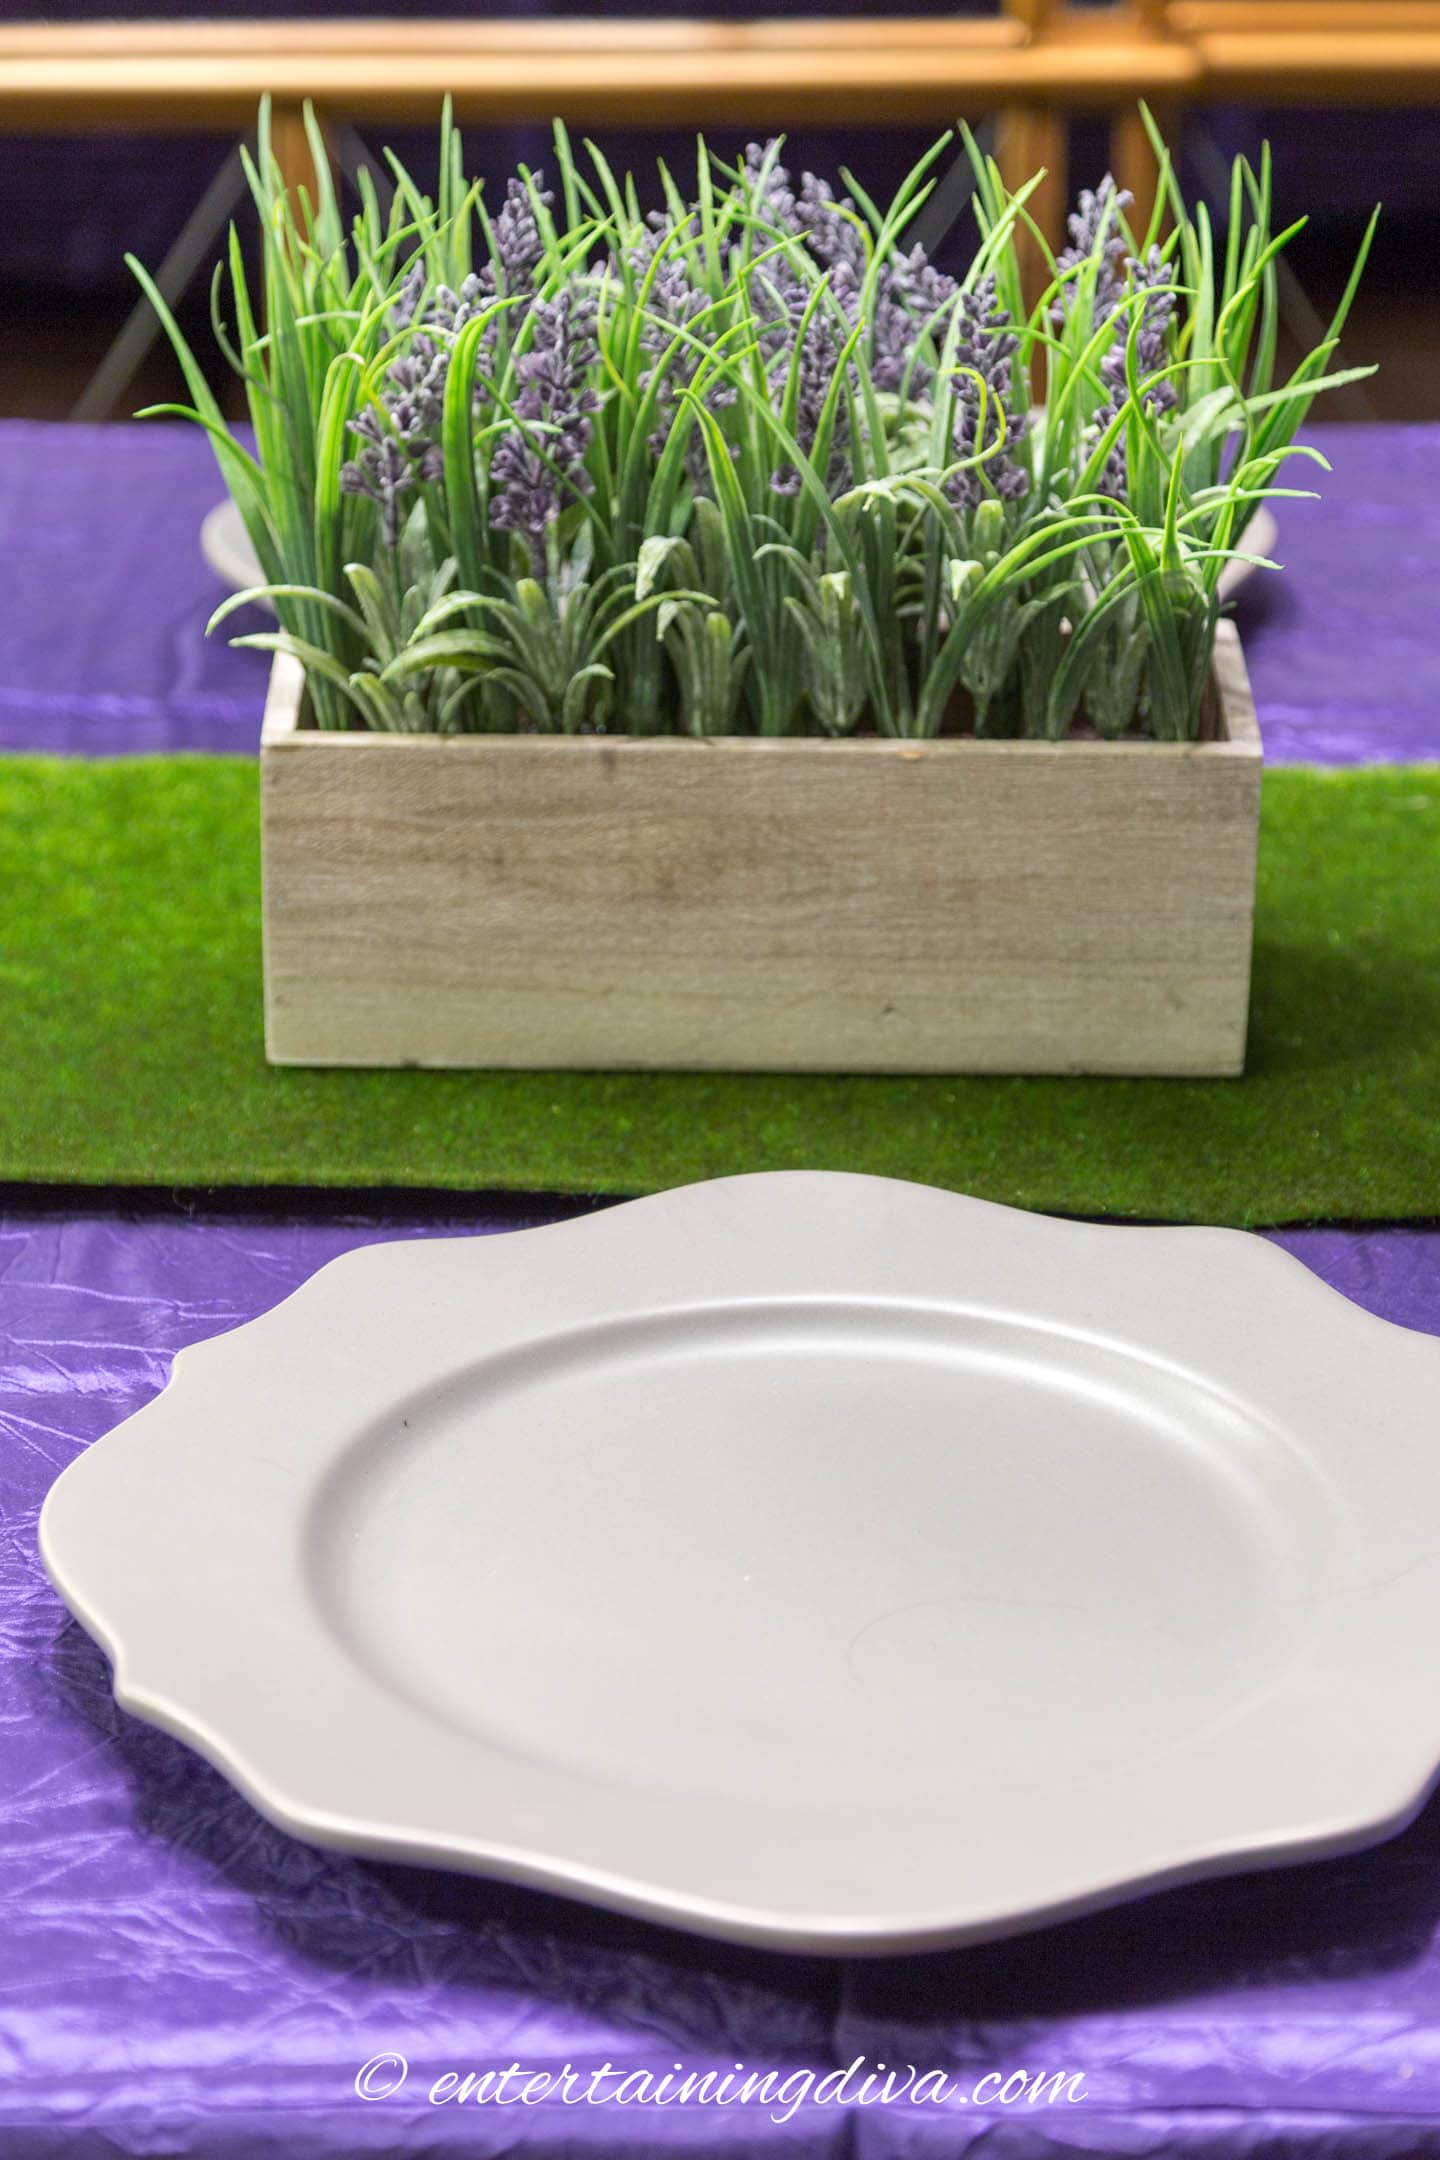 A gray charger goes with the plant container | How To Create An Easter Tablescape (Inspired by Spring)